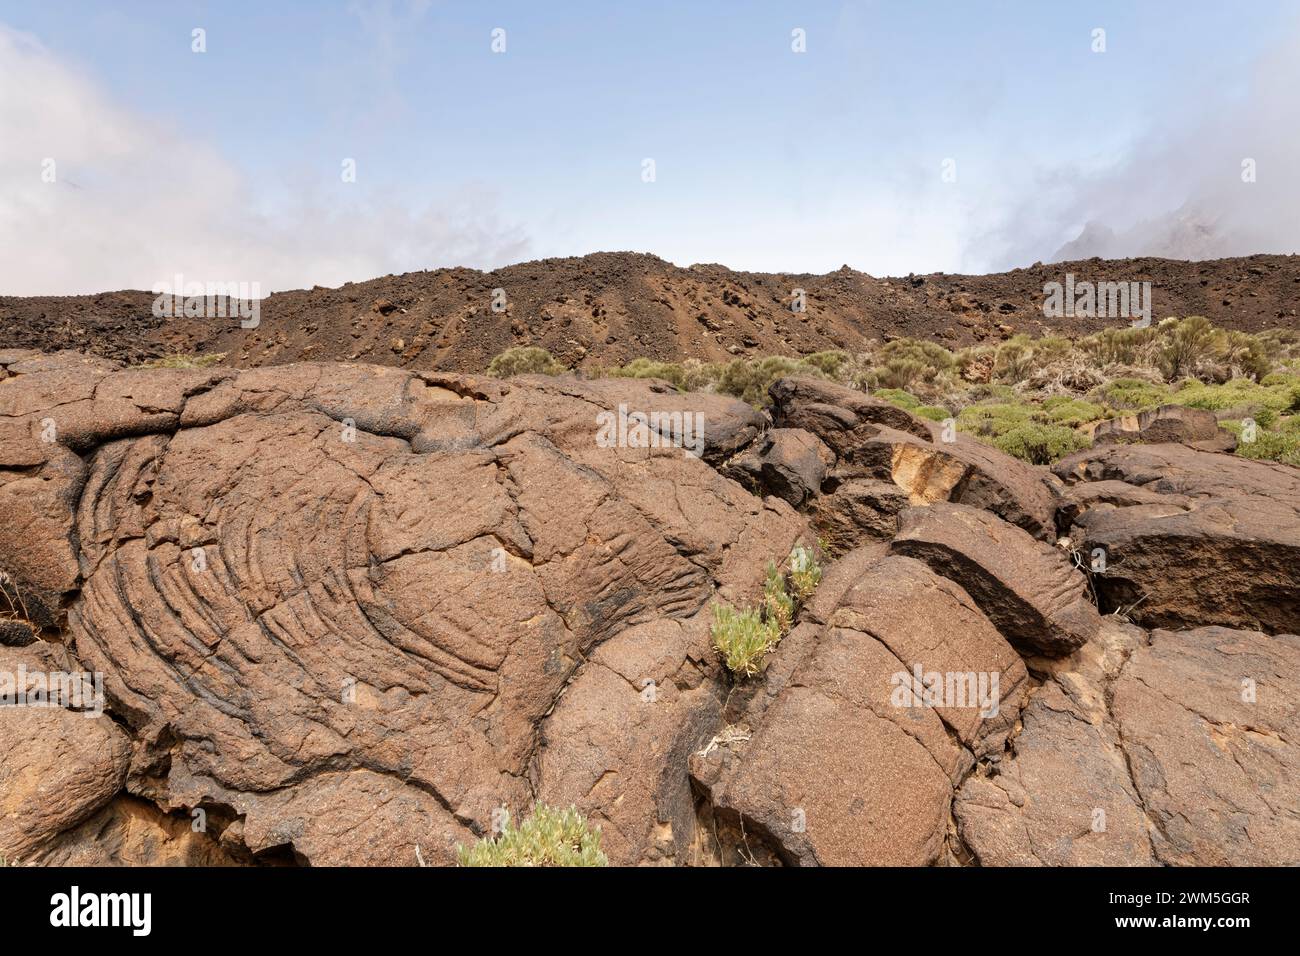 Old, cooled Pahoehoe lava with ropy texture, Teide National Park, Tenerife, Canary Islands, Spain, May. Stock Photo